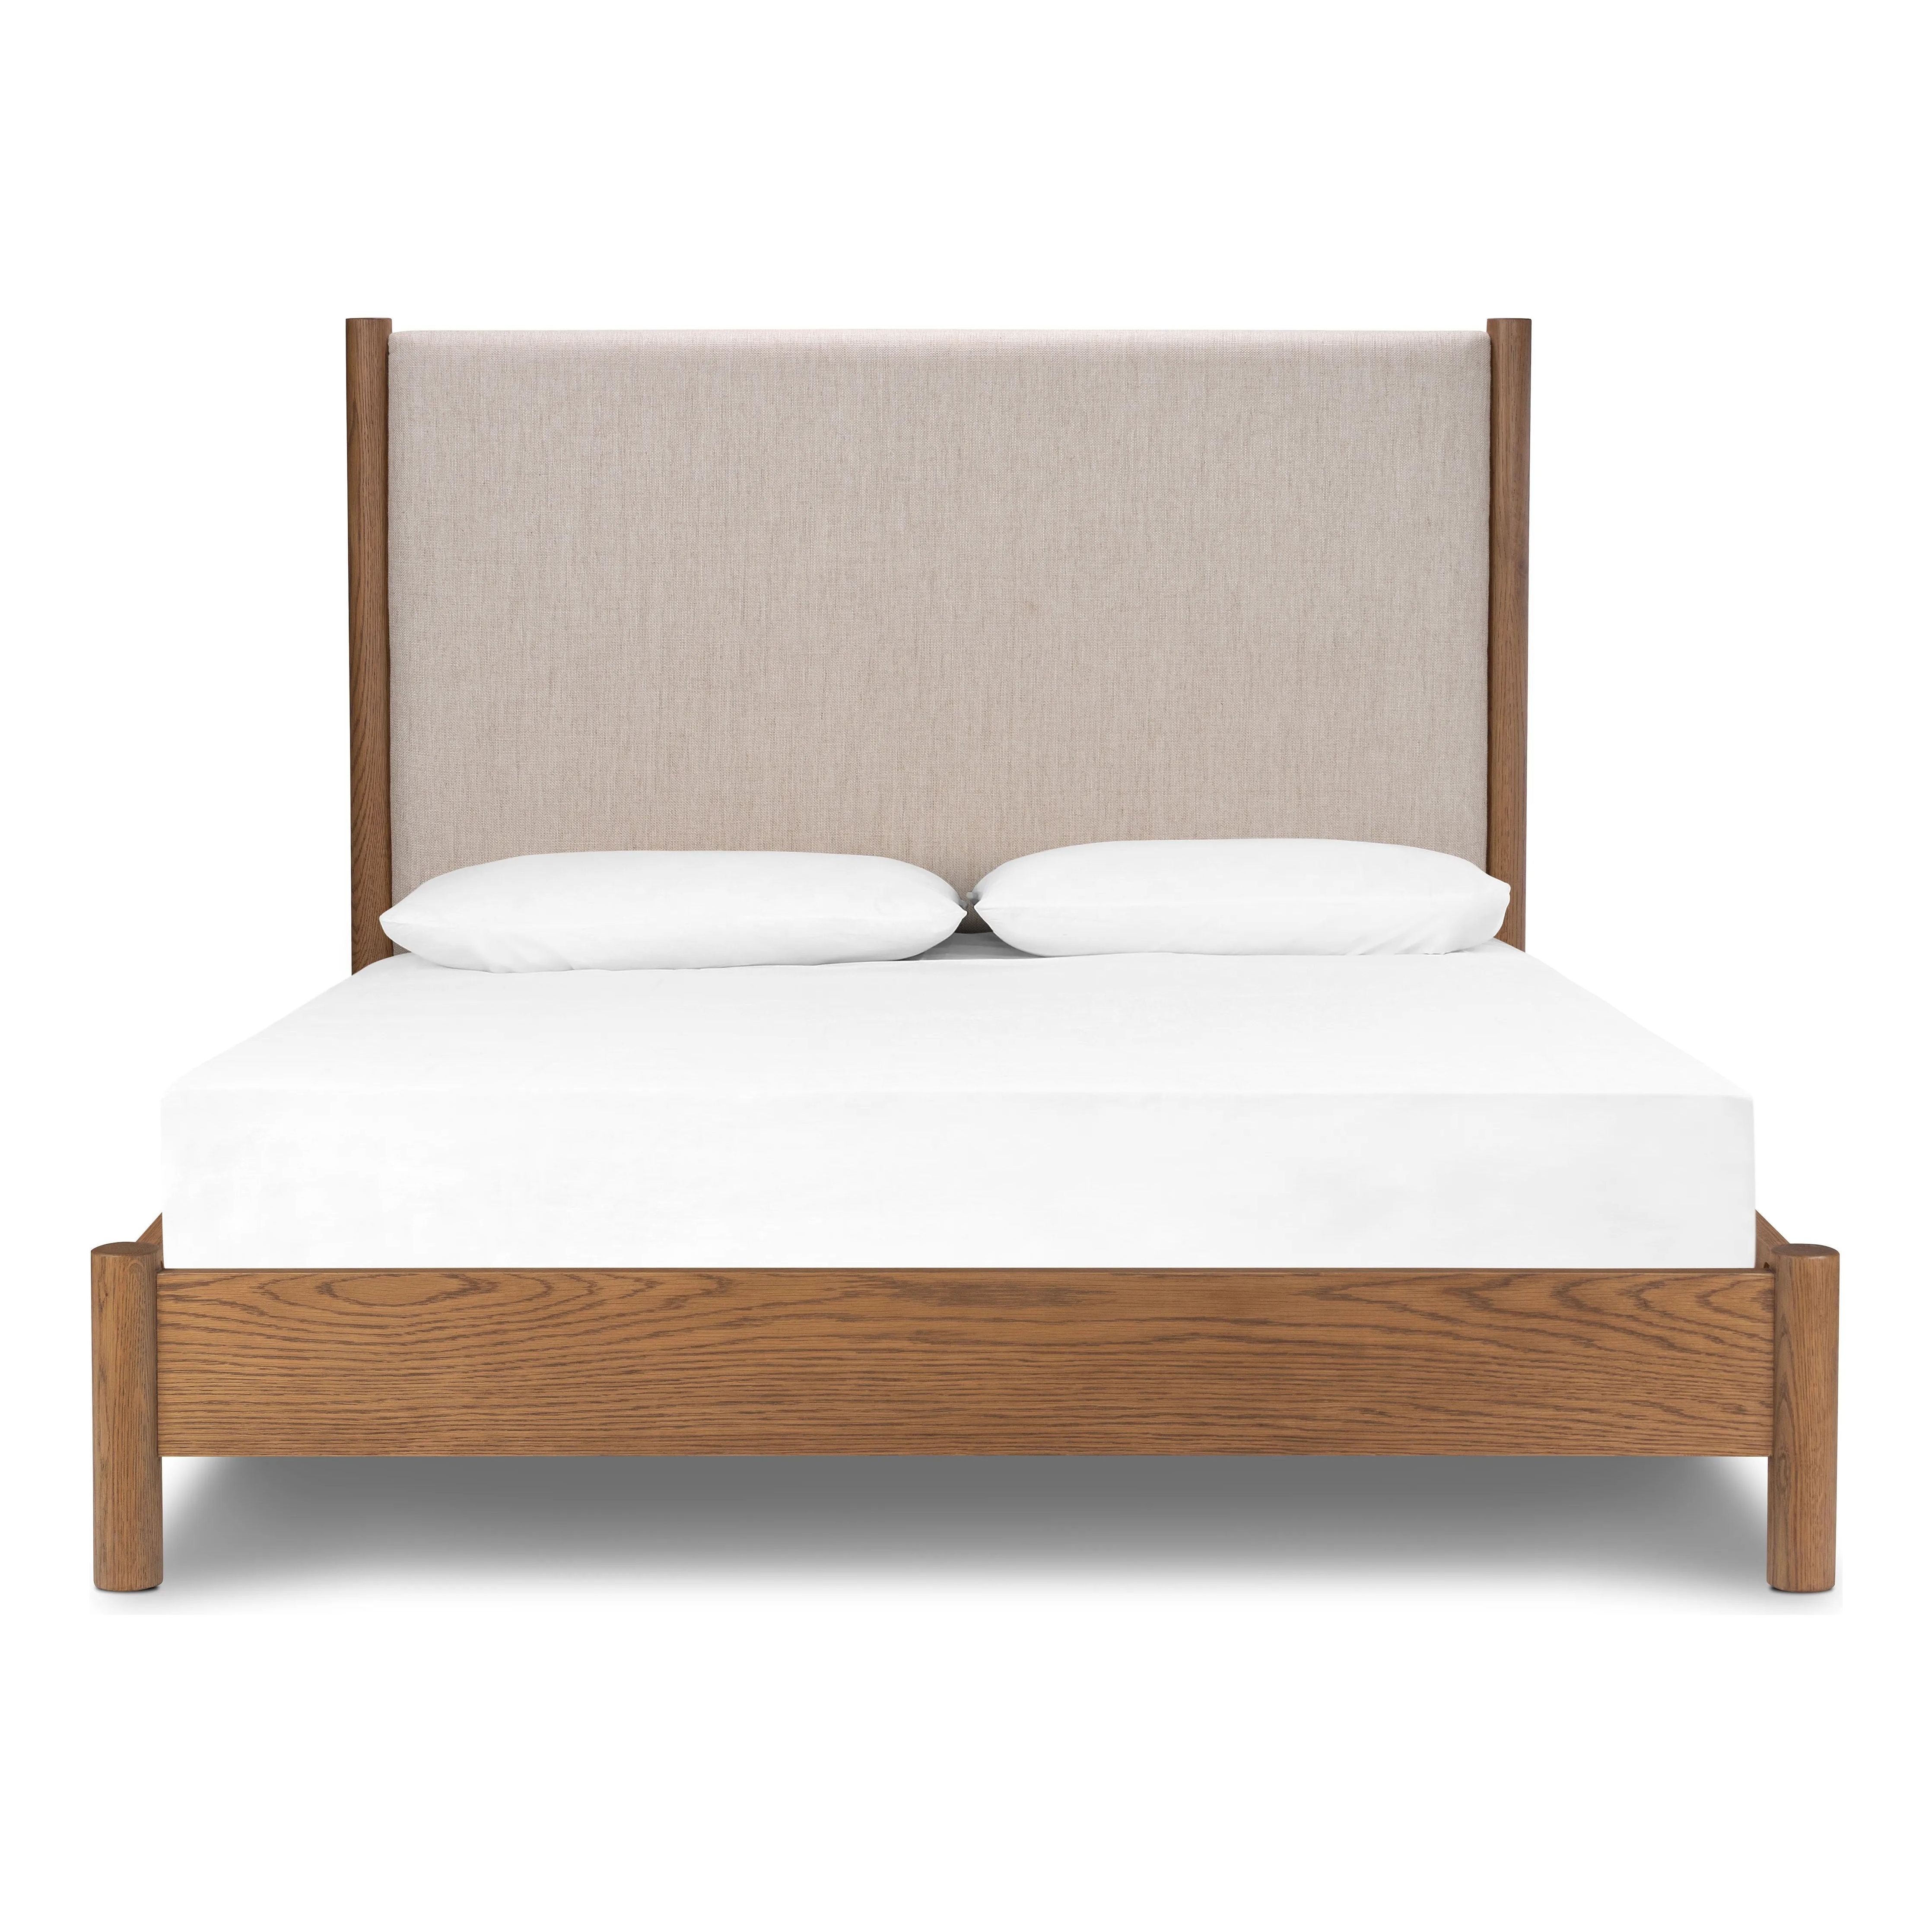 Rounded, chunky dowel legs in an amber oak finish frame the neutral, linen-like upholstered headboard of this bed frame.Collection: Bolto Amethyst Home provides interior design, new home construction design consulting, vintage area rugs, and lighting in the Winter Garden metro area.